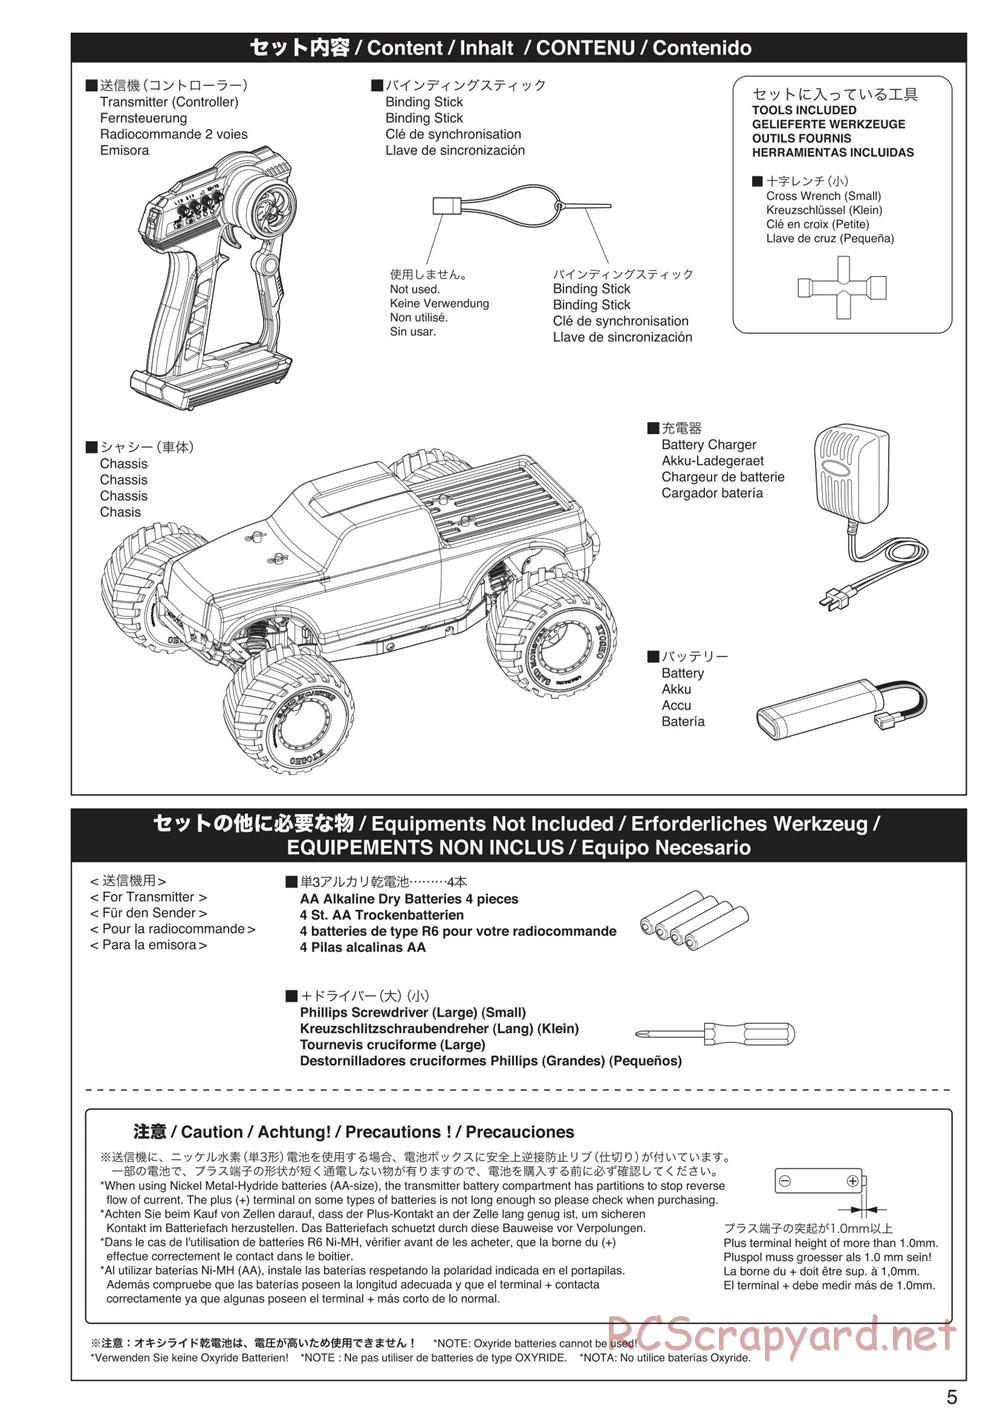 Kyosho - Monster Tracker EP - Manual - Page 5